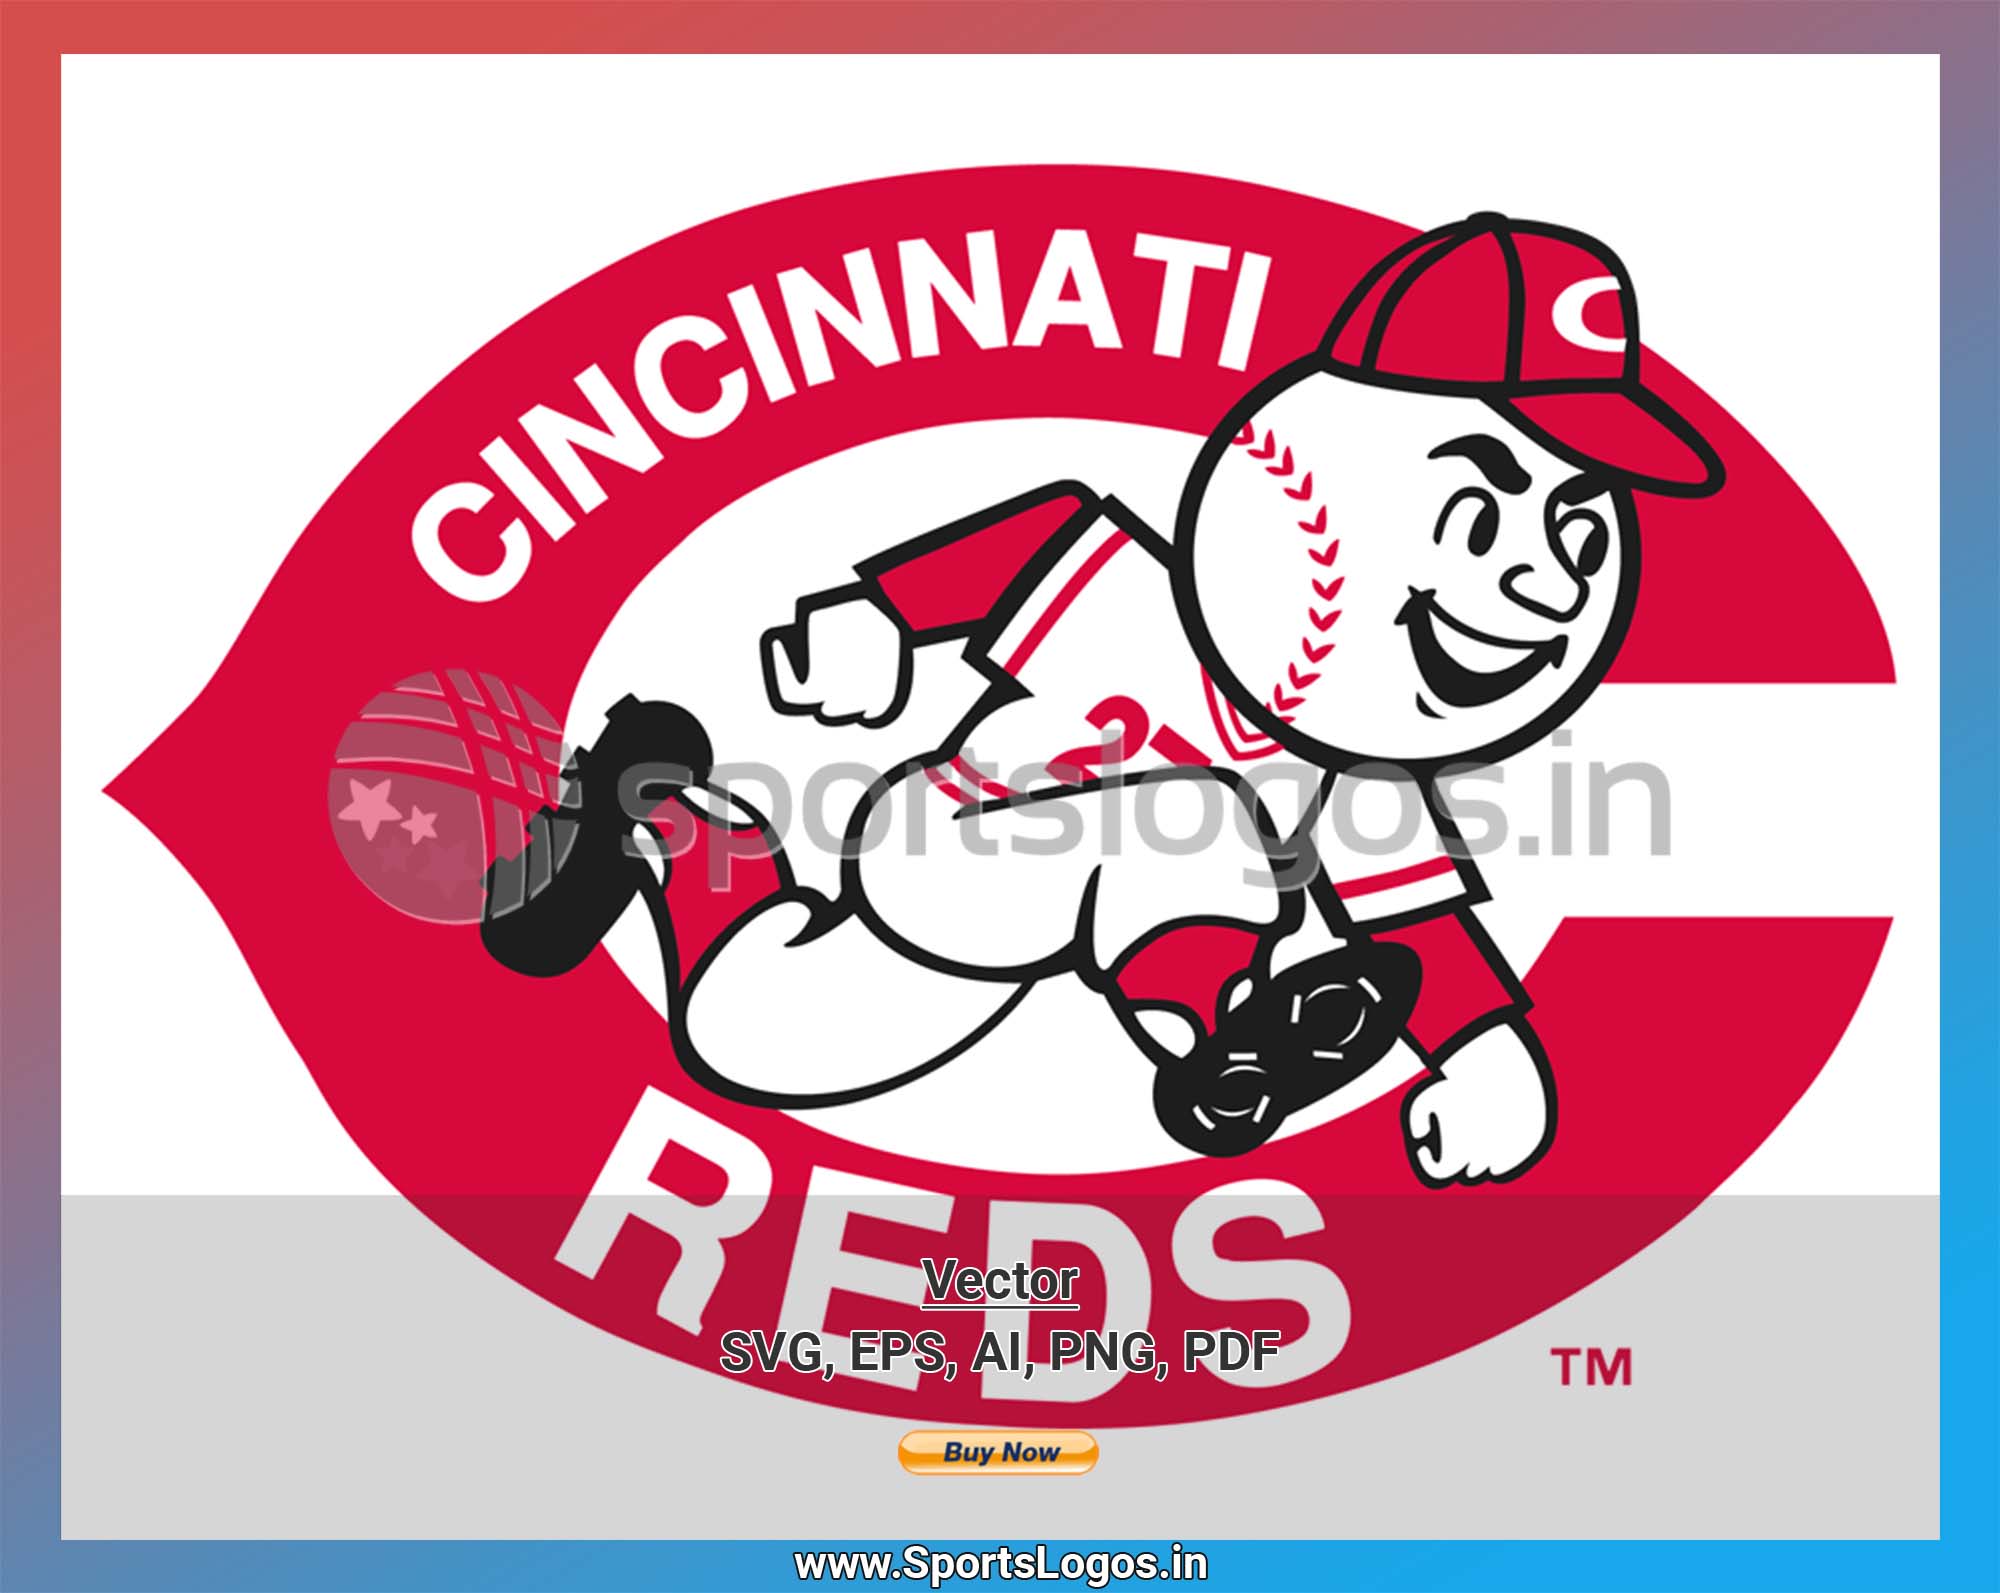 Cincinnati Reds - Baseball Sports Vector SVG Logo in 5 formats - SPLN000888  • Sports Logos - Embroidery & Vector for NFL, NBA, NHL, MLB, MiLB, and more!